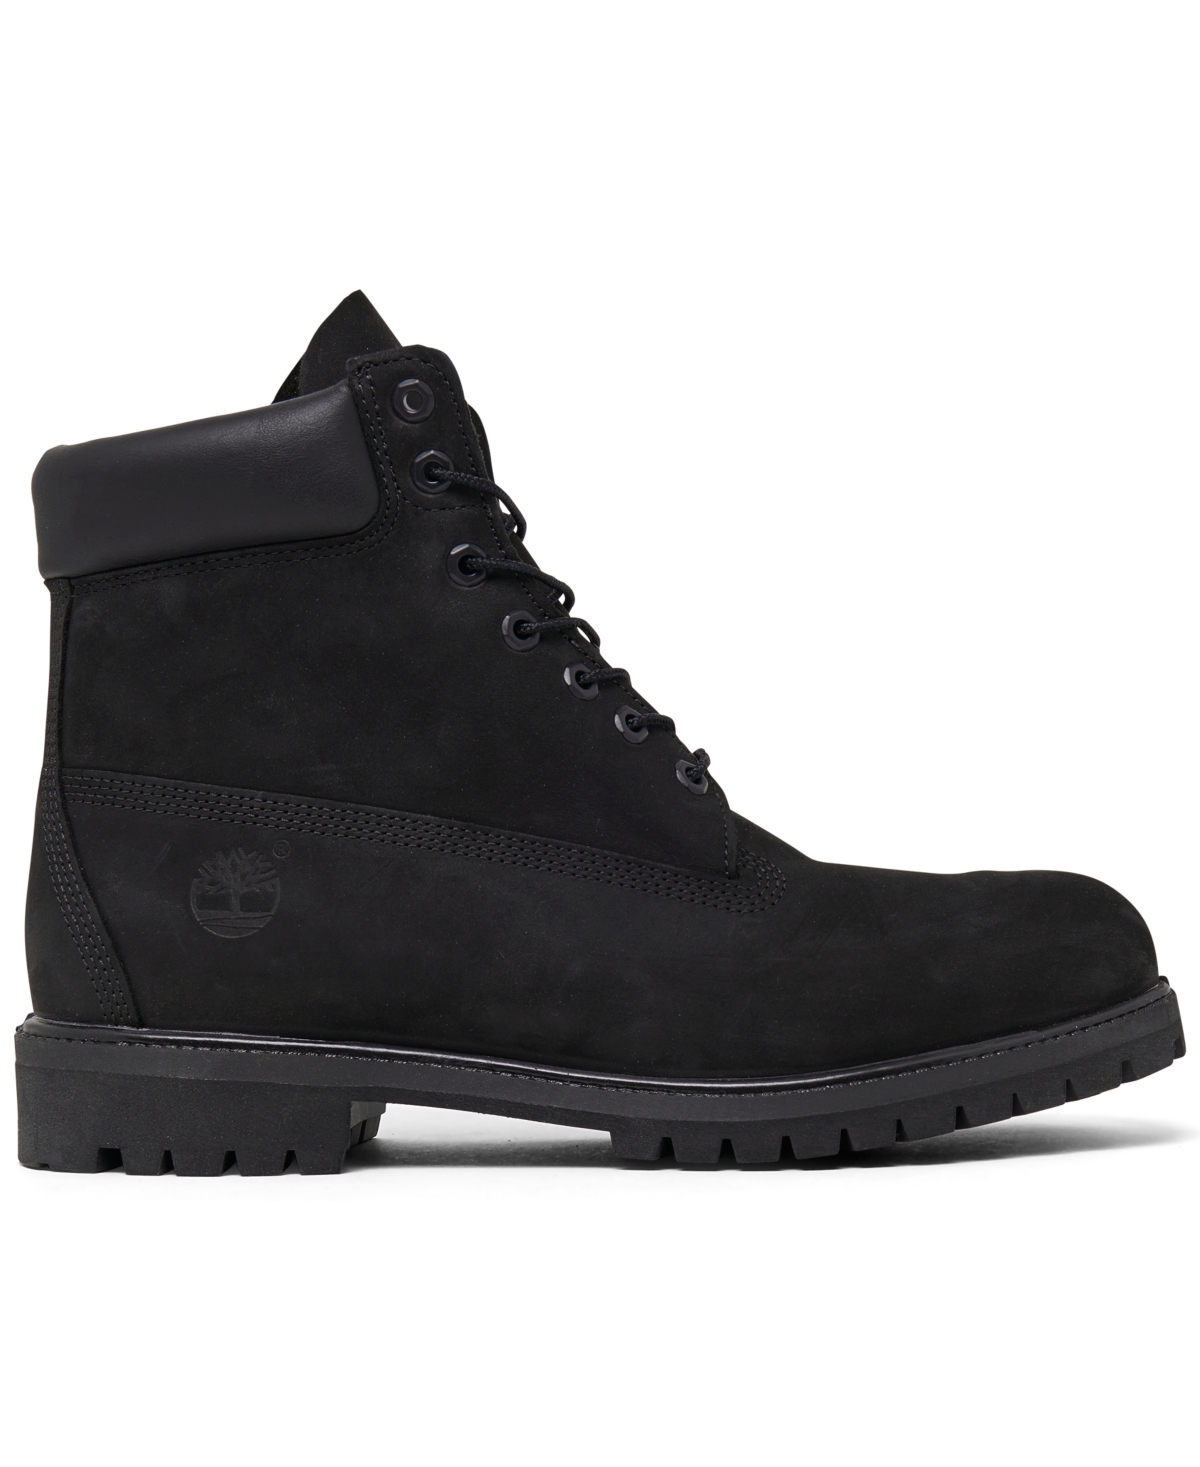 Shop Timberland Men's 6 Inch Premium Waterproof Boots From Finish Line In Black